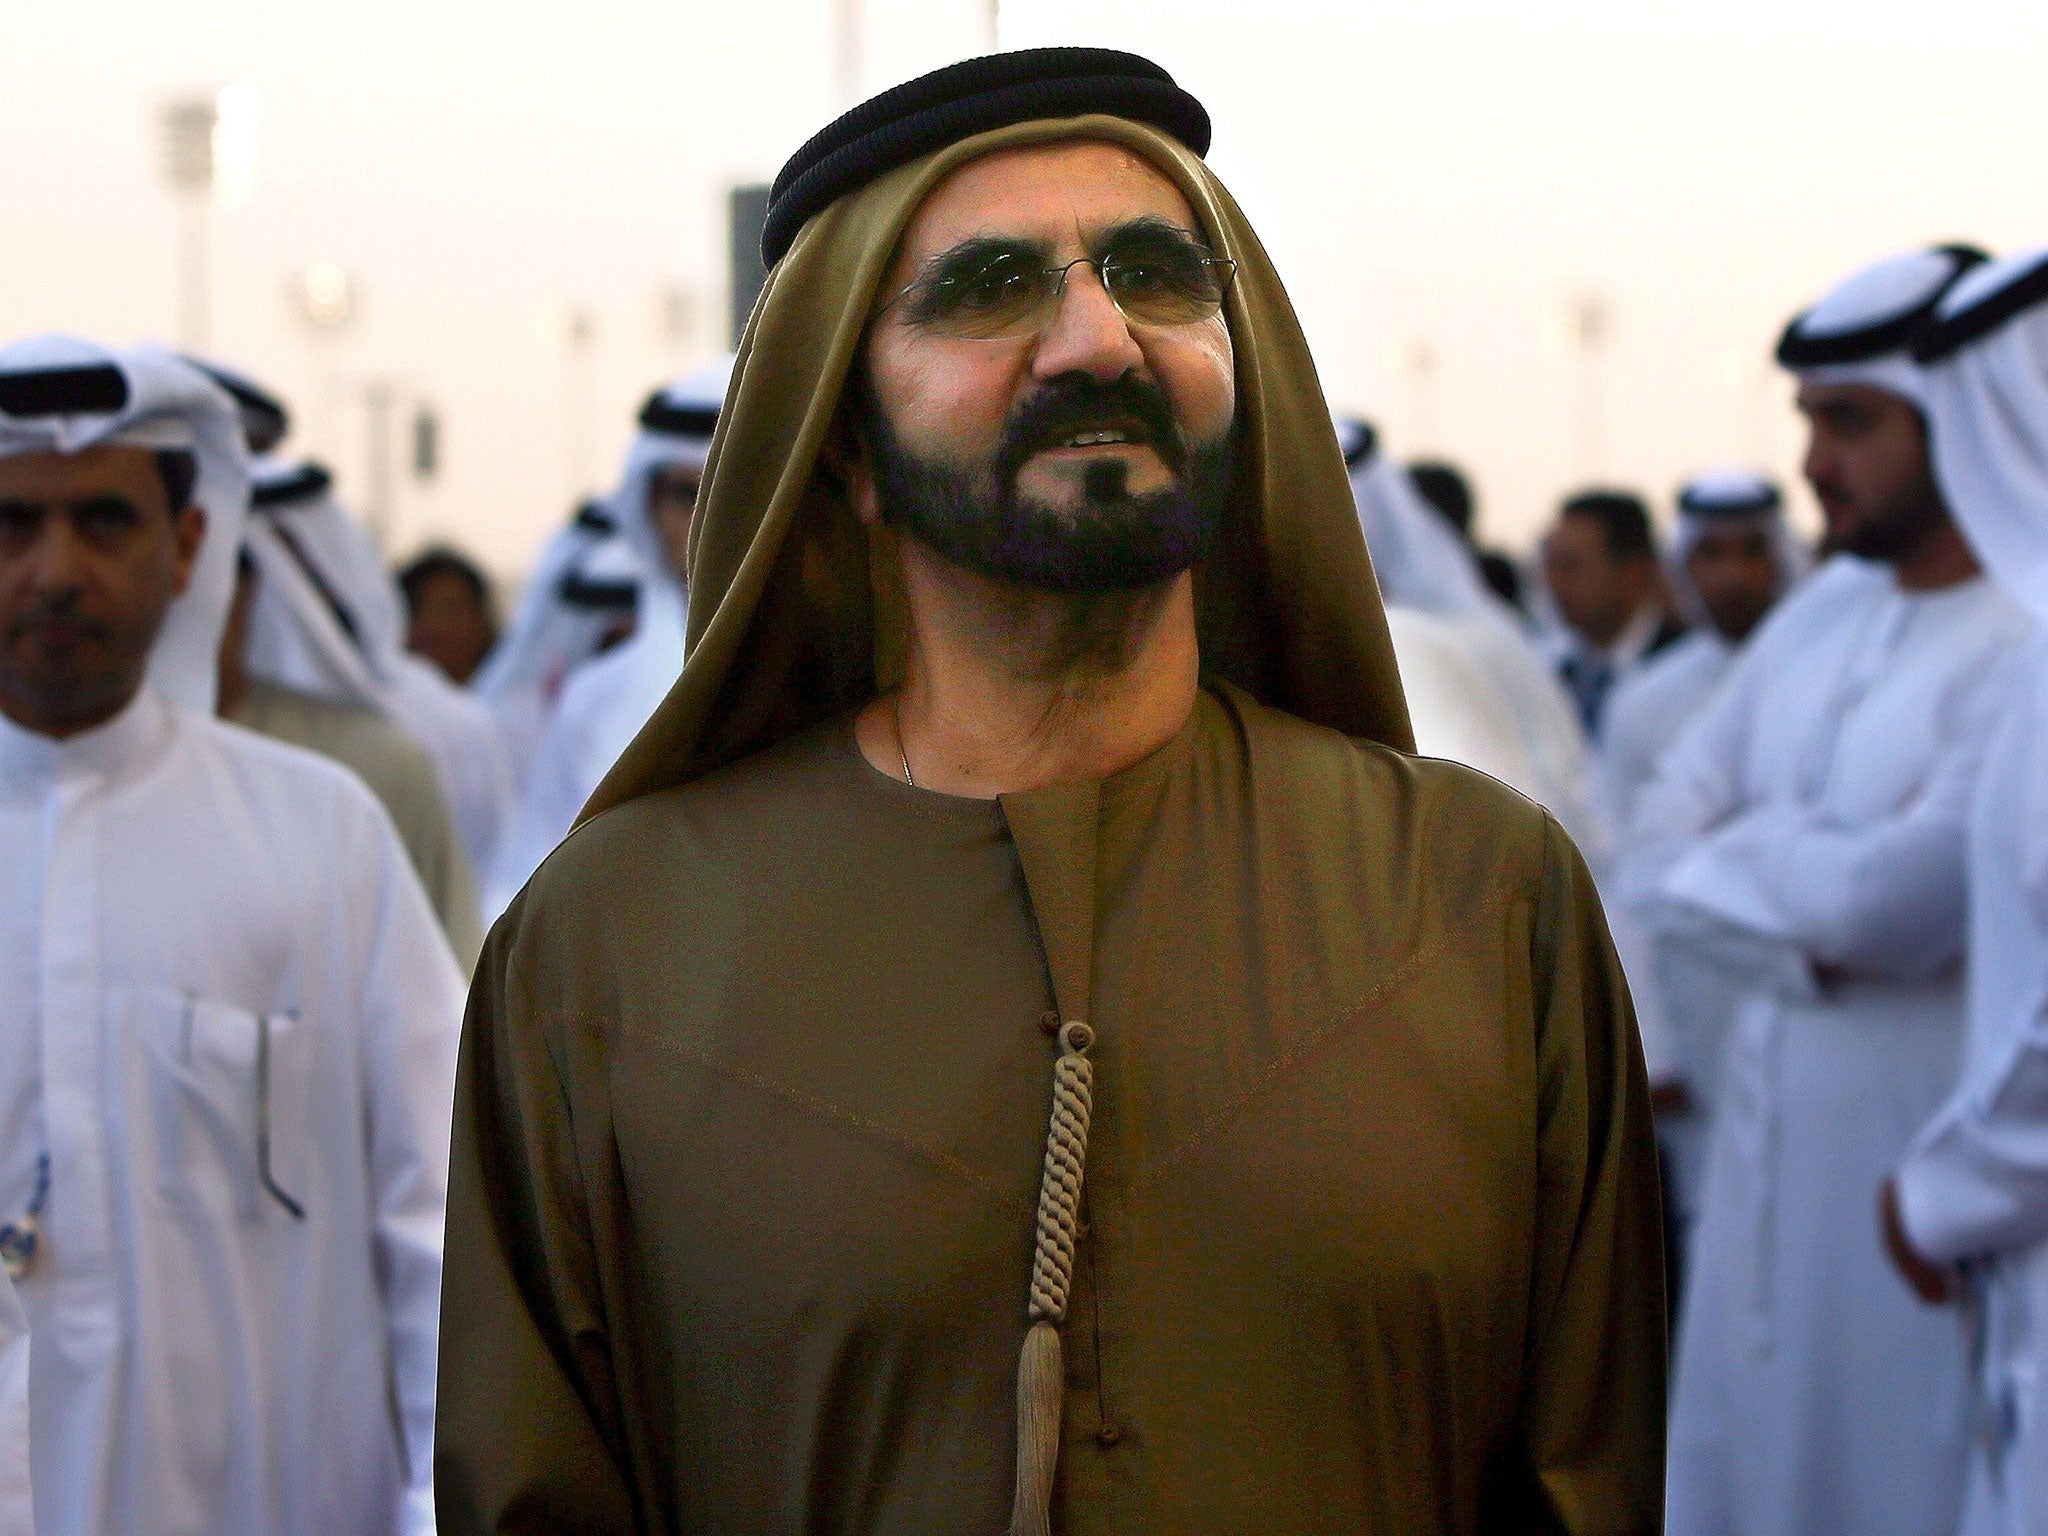 Sheikh Mohammed said his new Cabinet would focus on 'the future, youth, happiness, developing educating and combating climate change'